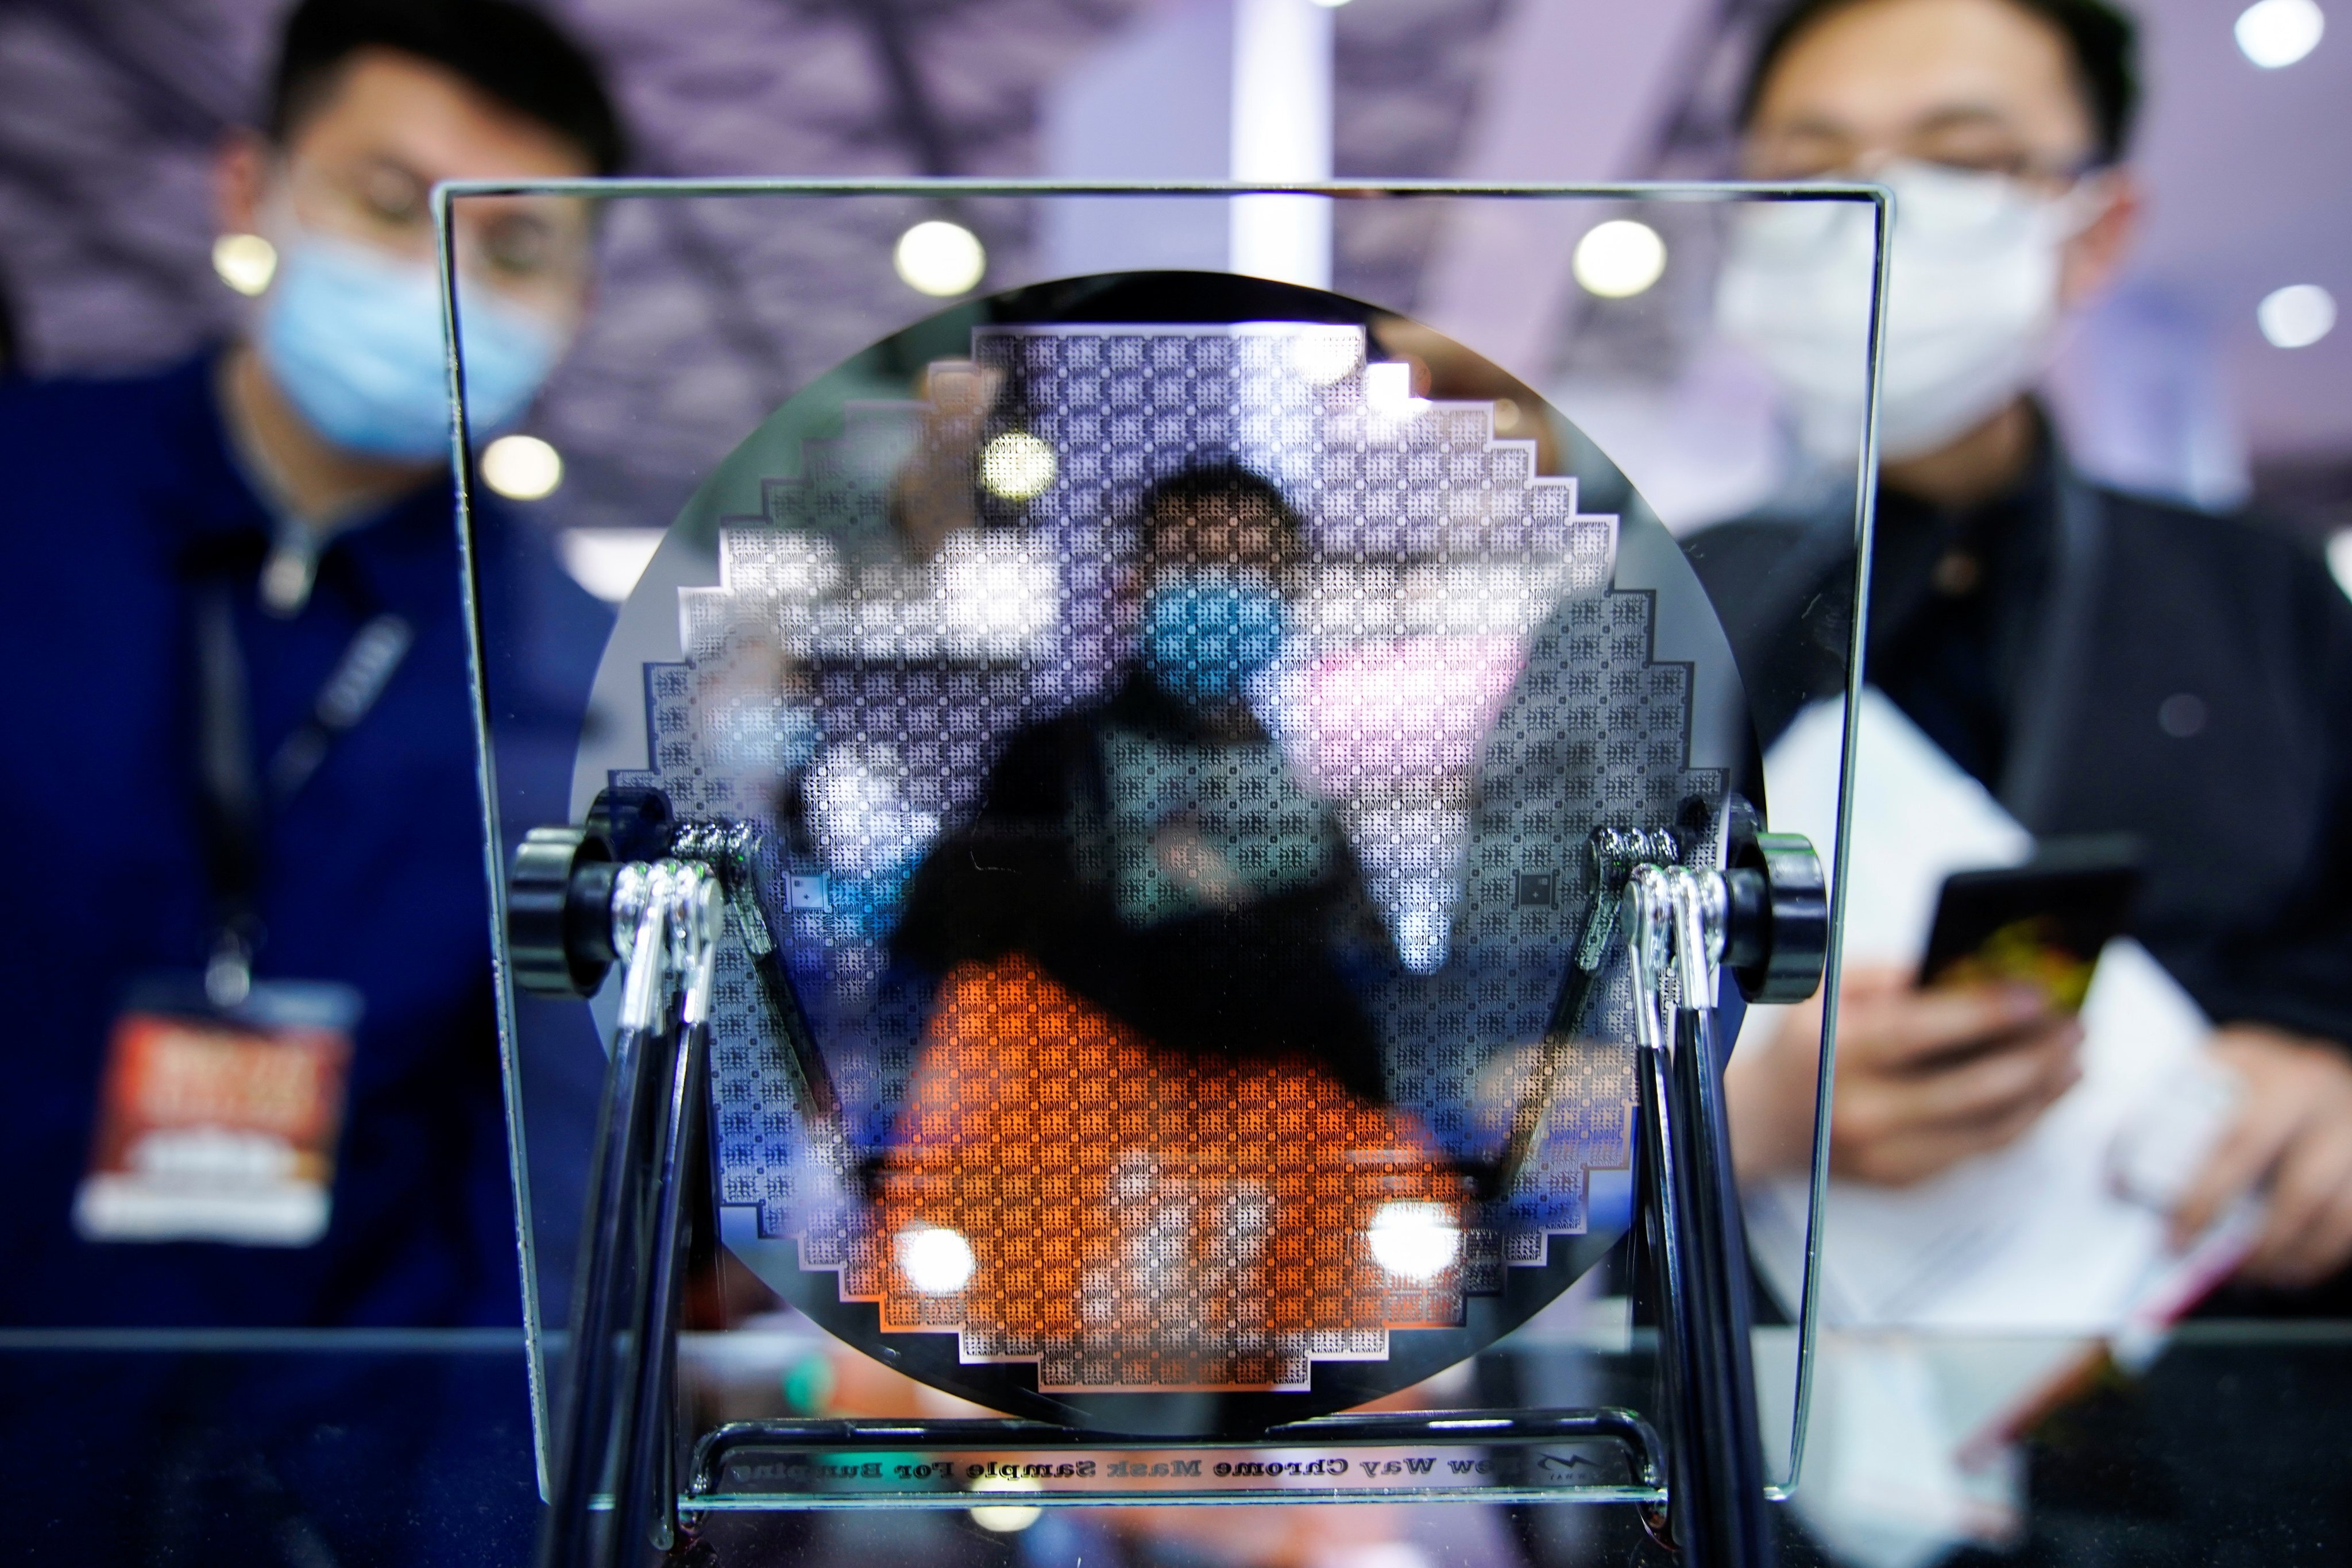 Visitors study a semiconductor display at the Semicon China trade fair in Shanghai, on March 17. The huge sums Beijing has ploughed into the sector have resulted in spectacular failures and the emergence of thousands of new companies that have no technological expertise but wish to capitalise on the subsidies. Photo: Reuters